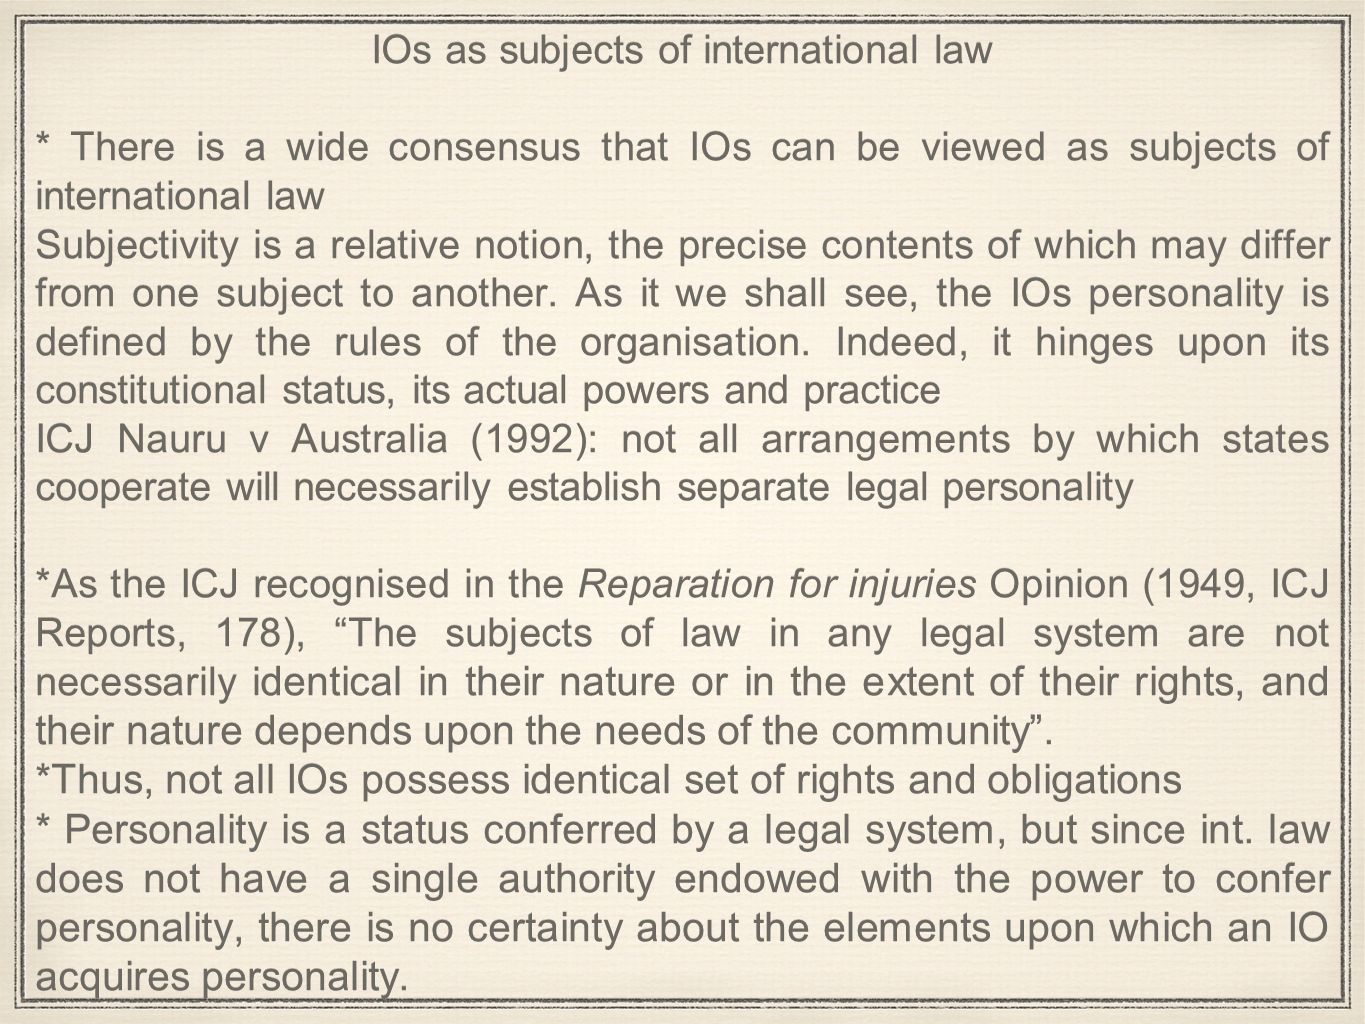 IOs as subjects of international law * There is a wide consensus that IOs can be viewed as subjects of international law Subjectivity is a relative notion, the precise contents of which may differ from one subject to another.